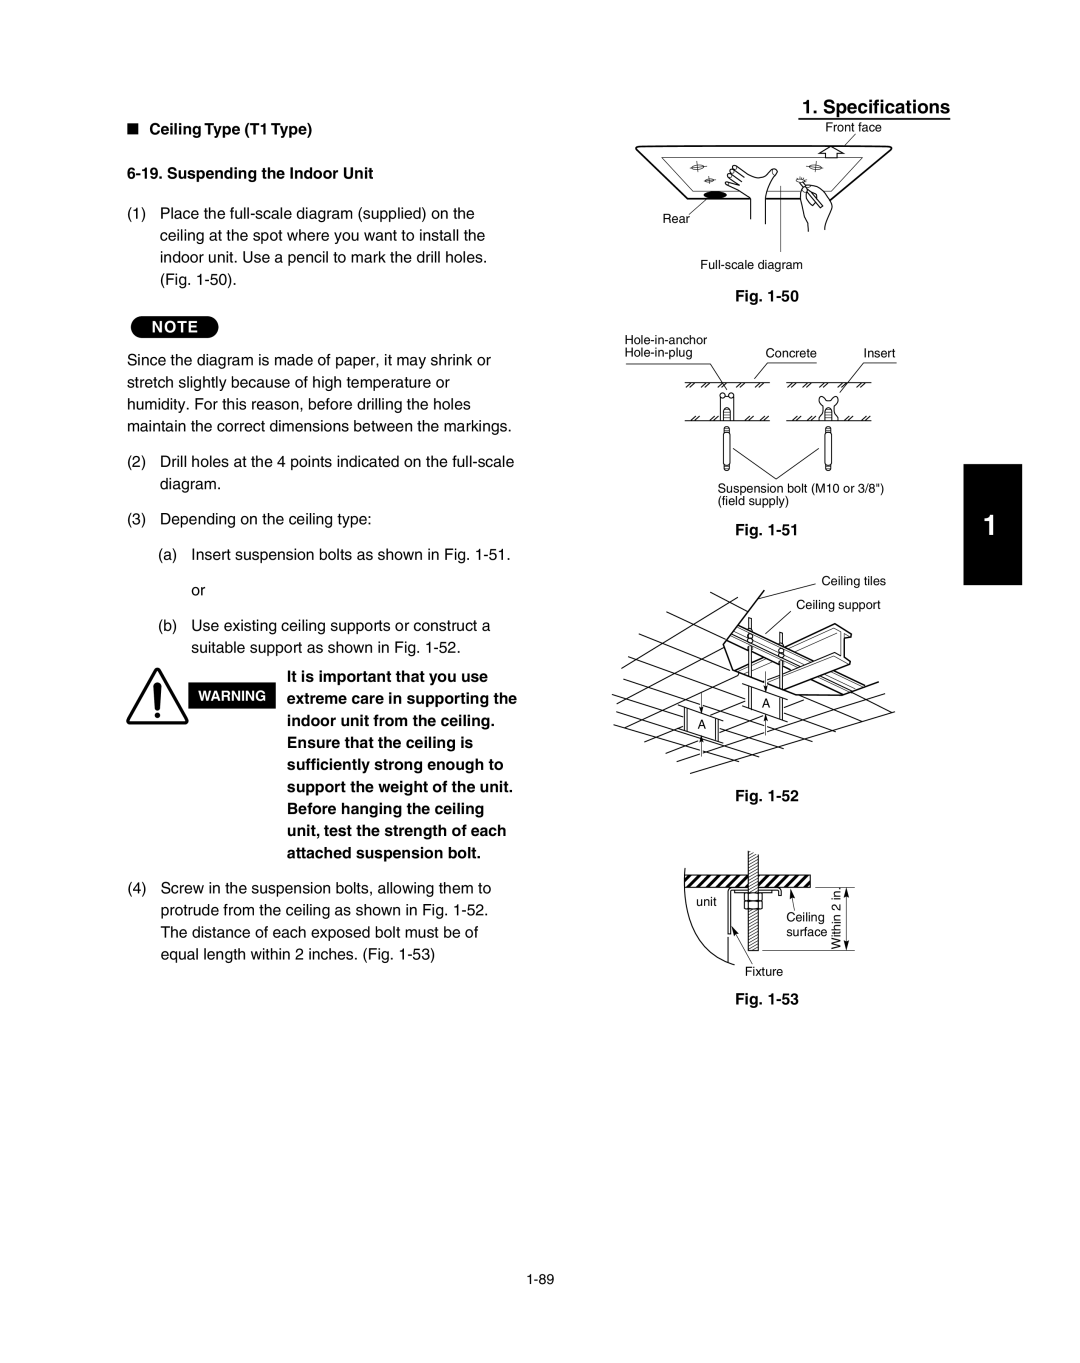 Panasonic R410A service manual Specifications, Ceiling Type T1 Type, Suspending the Indoor Unit, Fig 